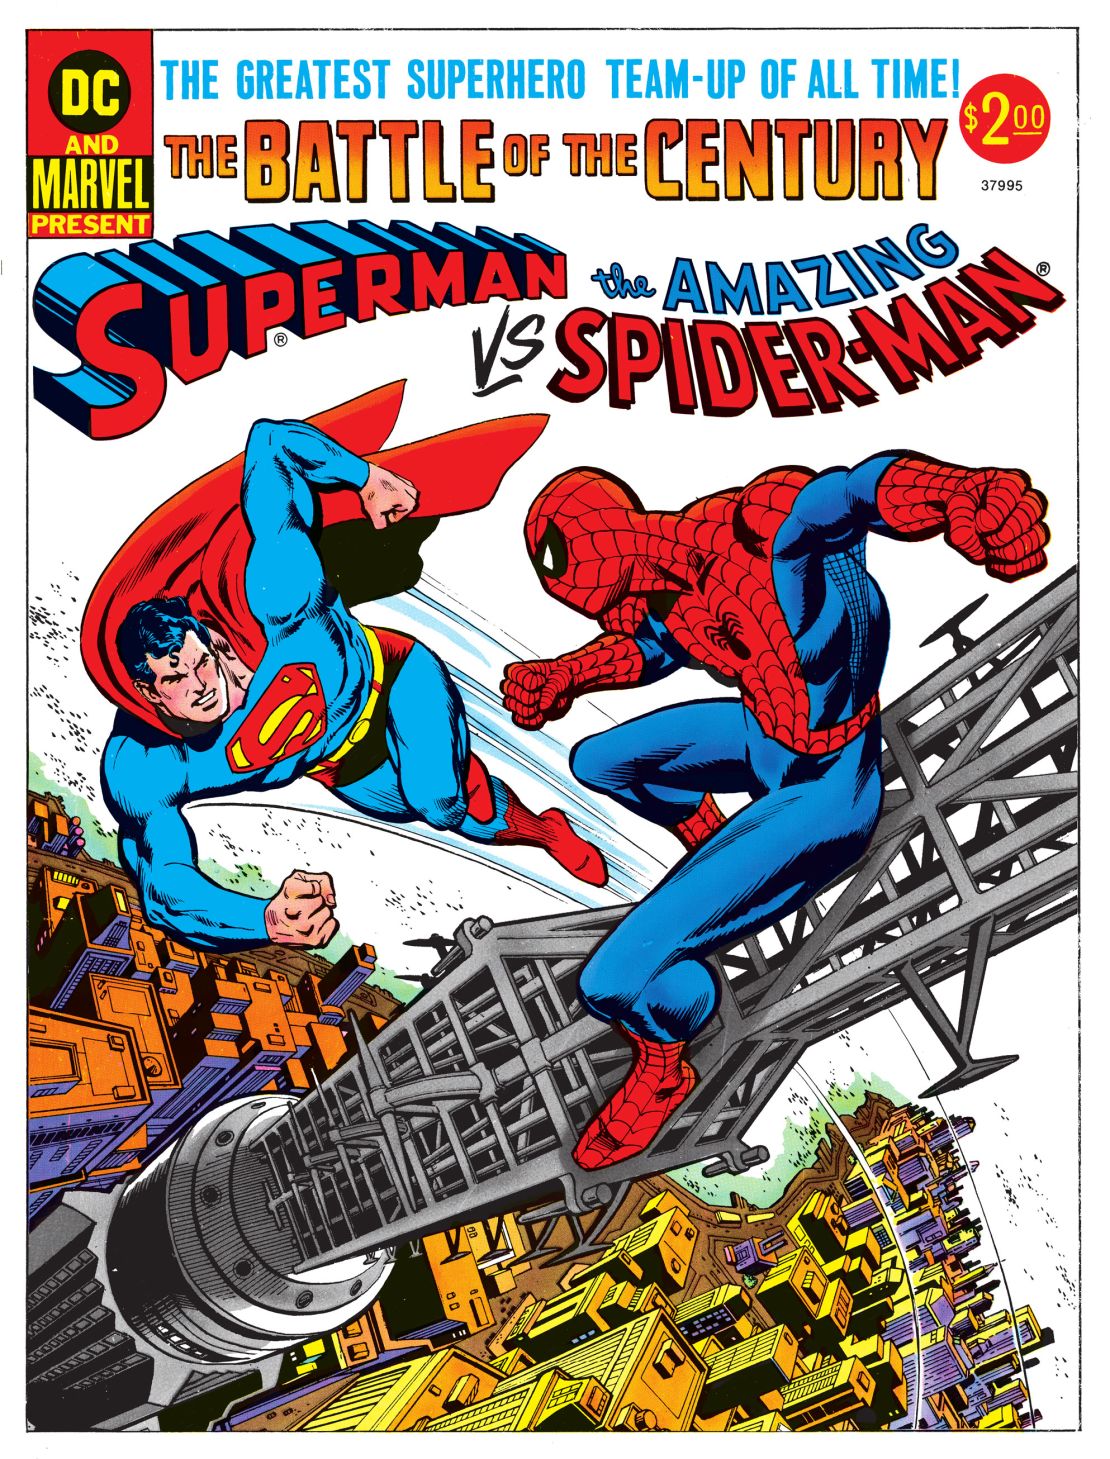 DC and Marvel collaborated on works like the 1976 "Superman vs. The Amazing Spider-Man".